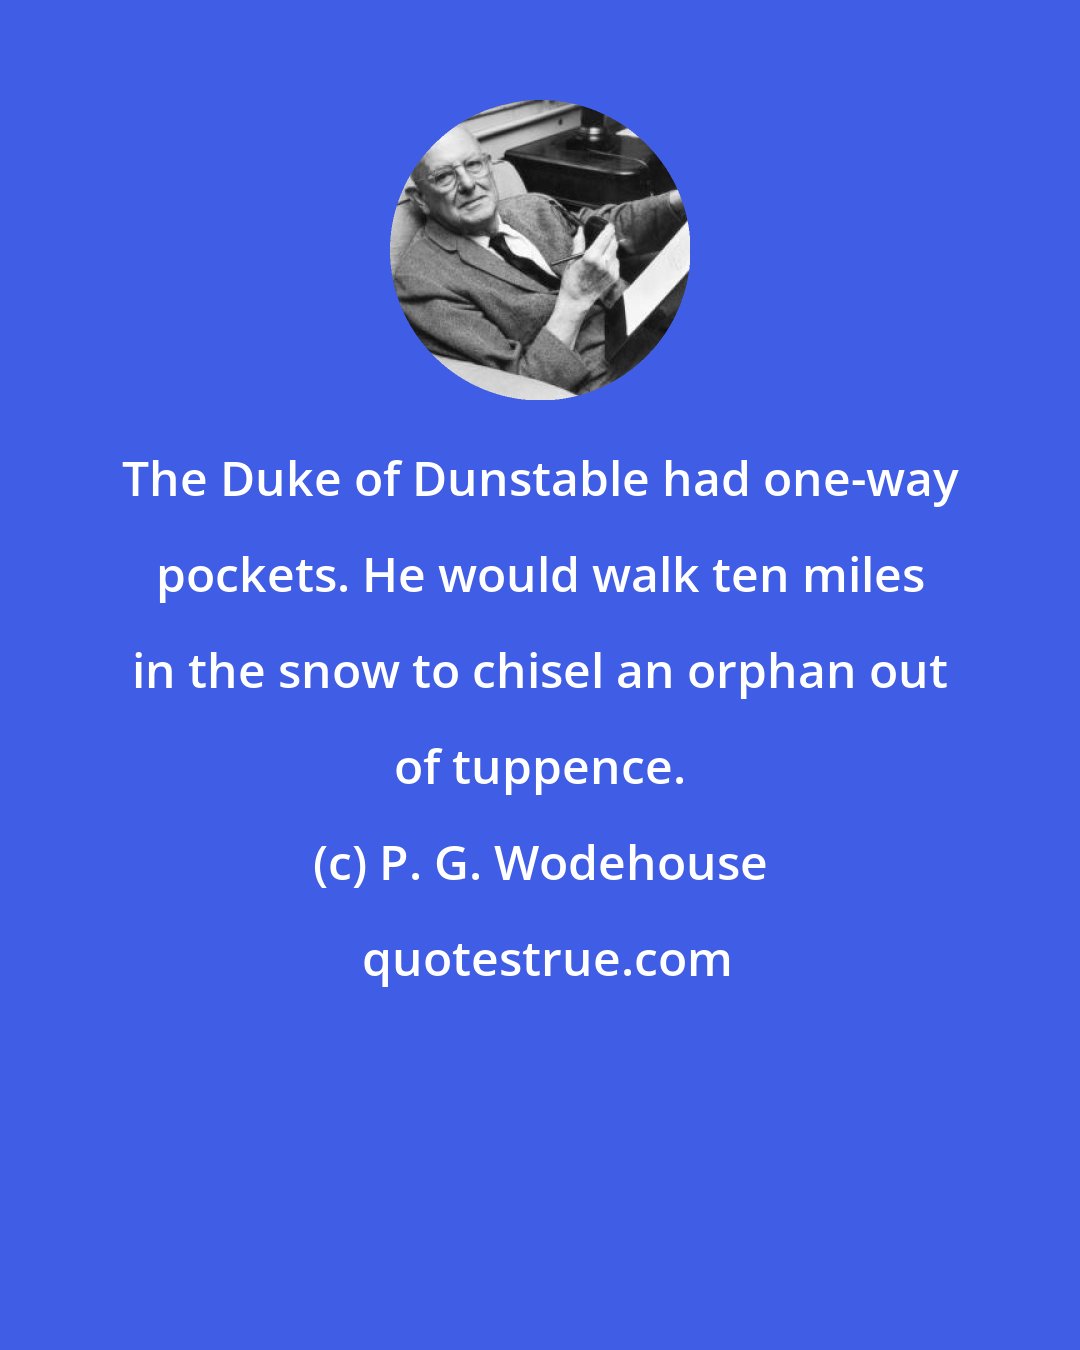 P. G. Wodehouse: The Duke of Dunstable had one-way pockets. He would walk ten miles in the snow to chisel an orphan out of tuppence.